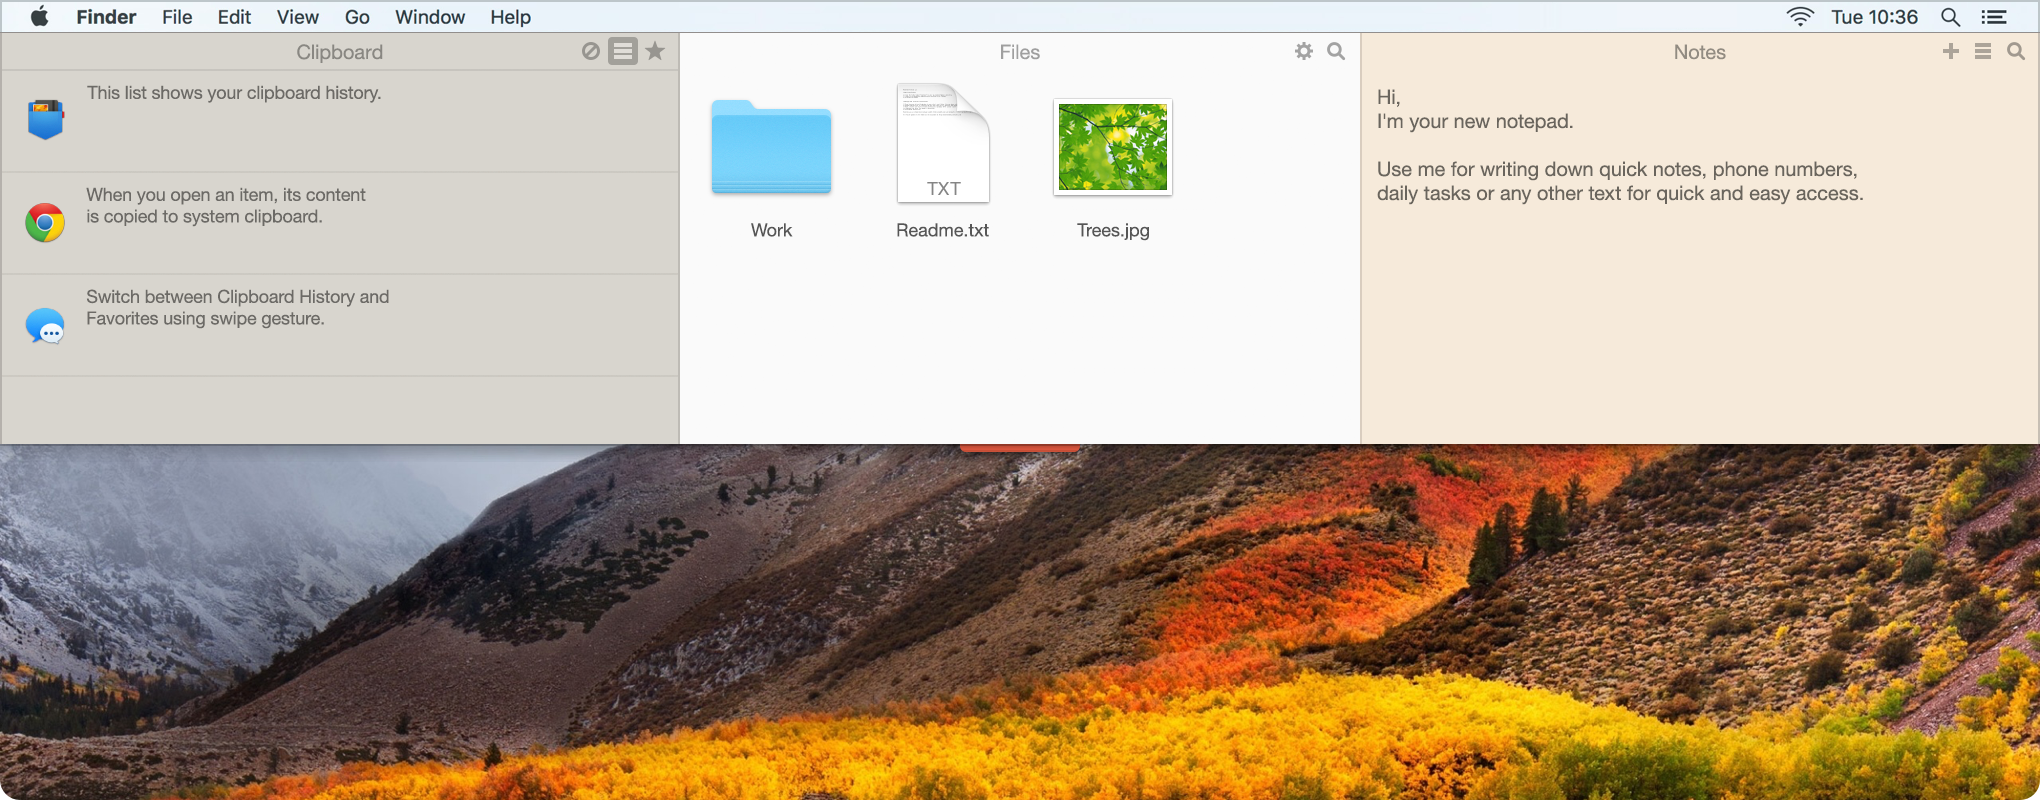 Unclutter - a new handy place on your desktop for storing notes, files and pasteboard clips.